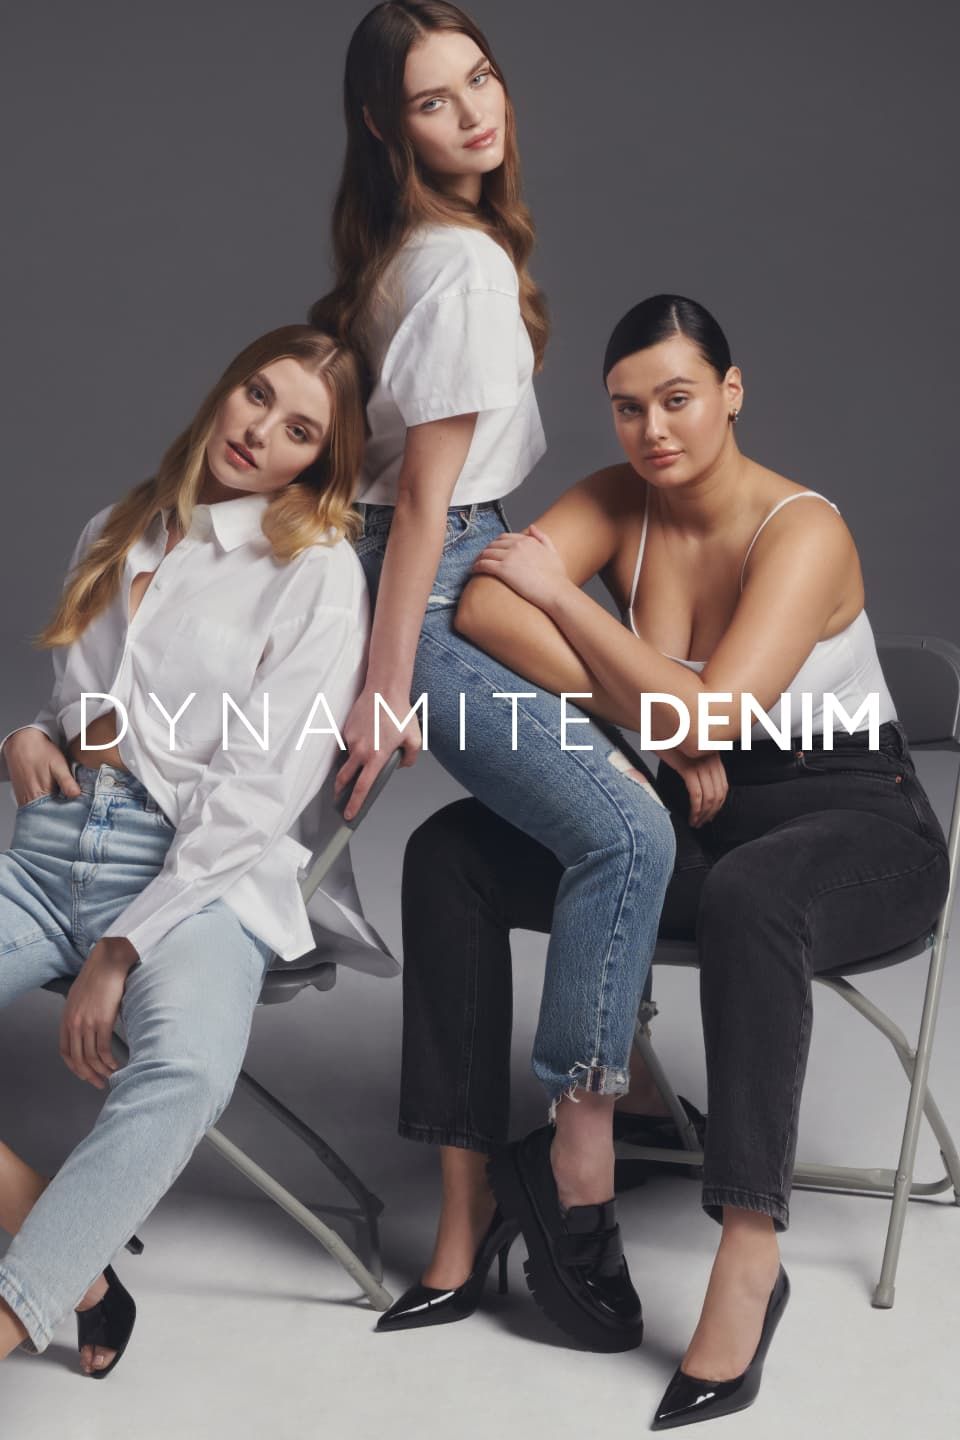 Three models wear light blue, dark blue and black jeans with white tops.